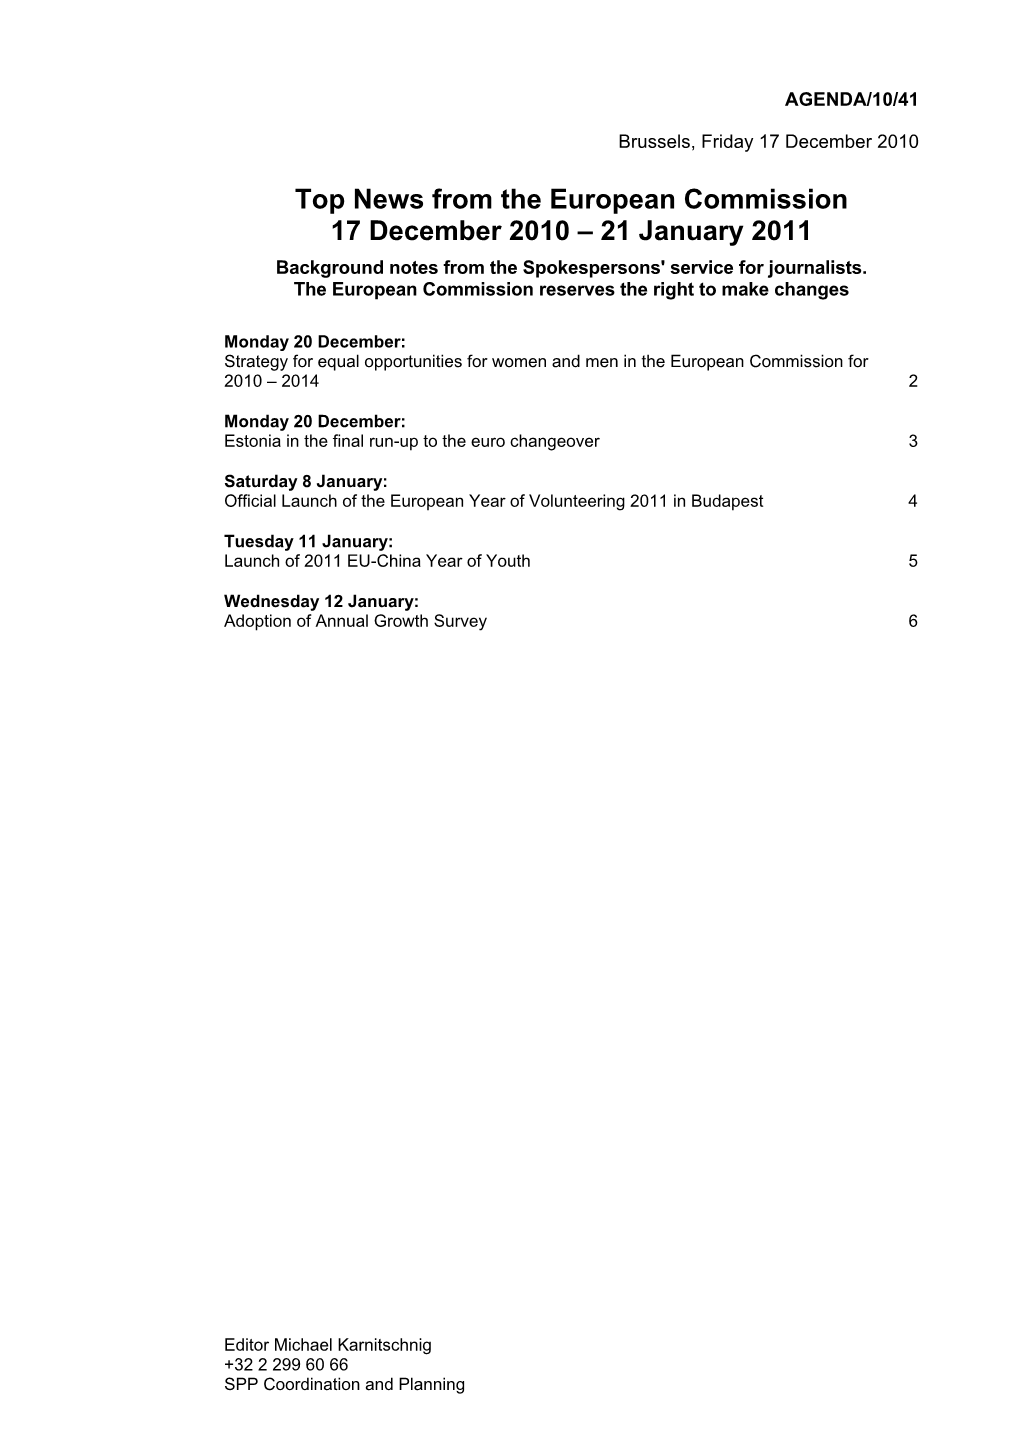 Top News from the European Commission 17 December 2010 – 21 January 2011 Background Notes from the Spokespersons' Service for Journalists